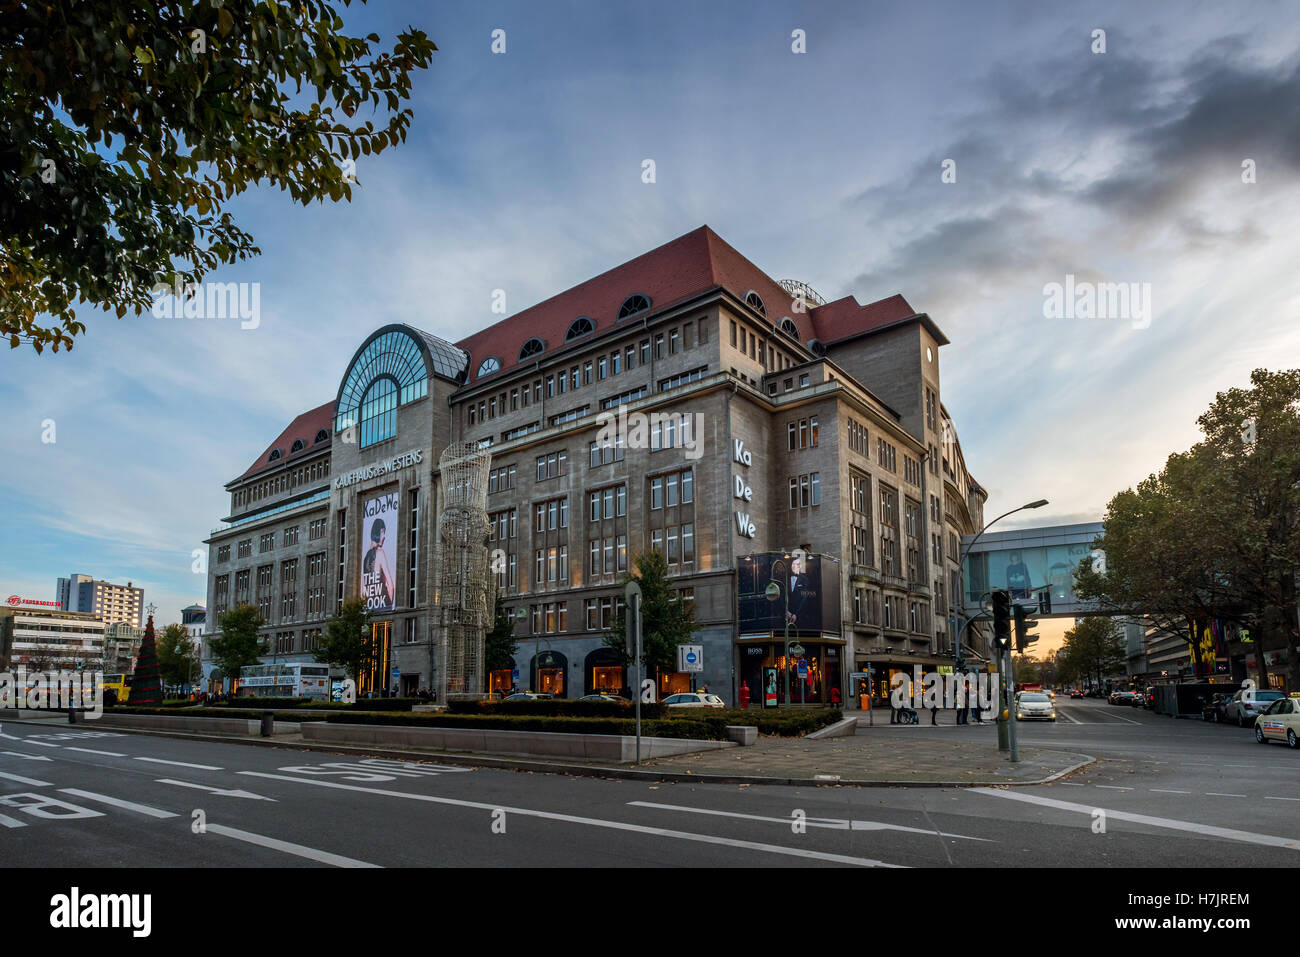 Kaufhaus Des Westens, or KaDeWe, the largest department store in Germany, on Tauntzienstrasse in Berlin Stock Photo